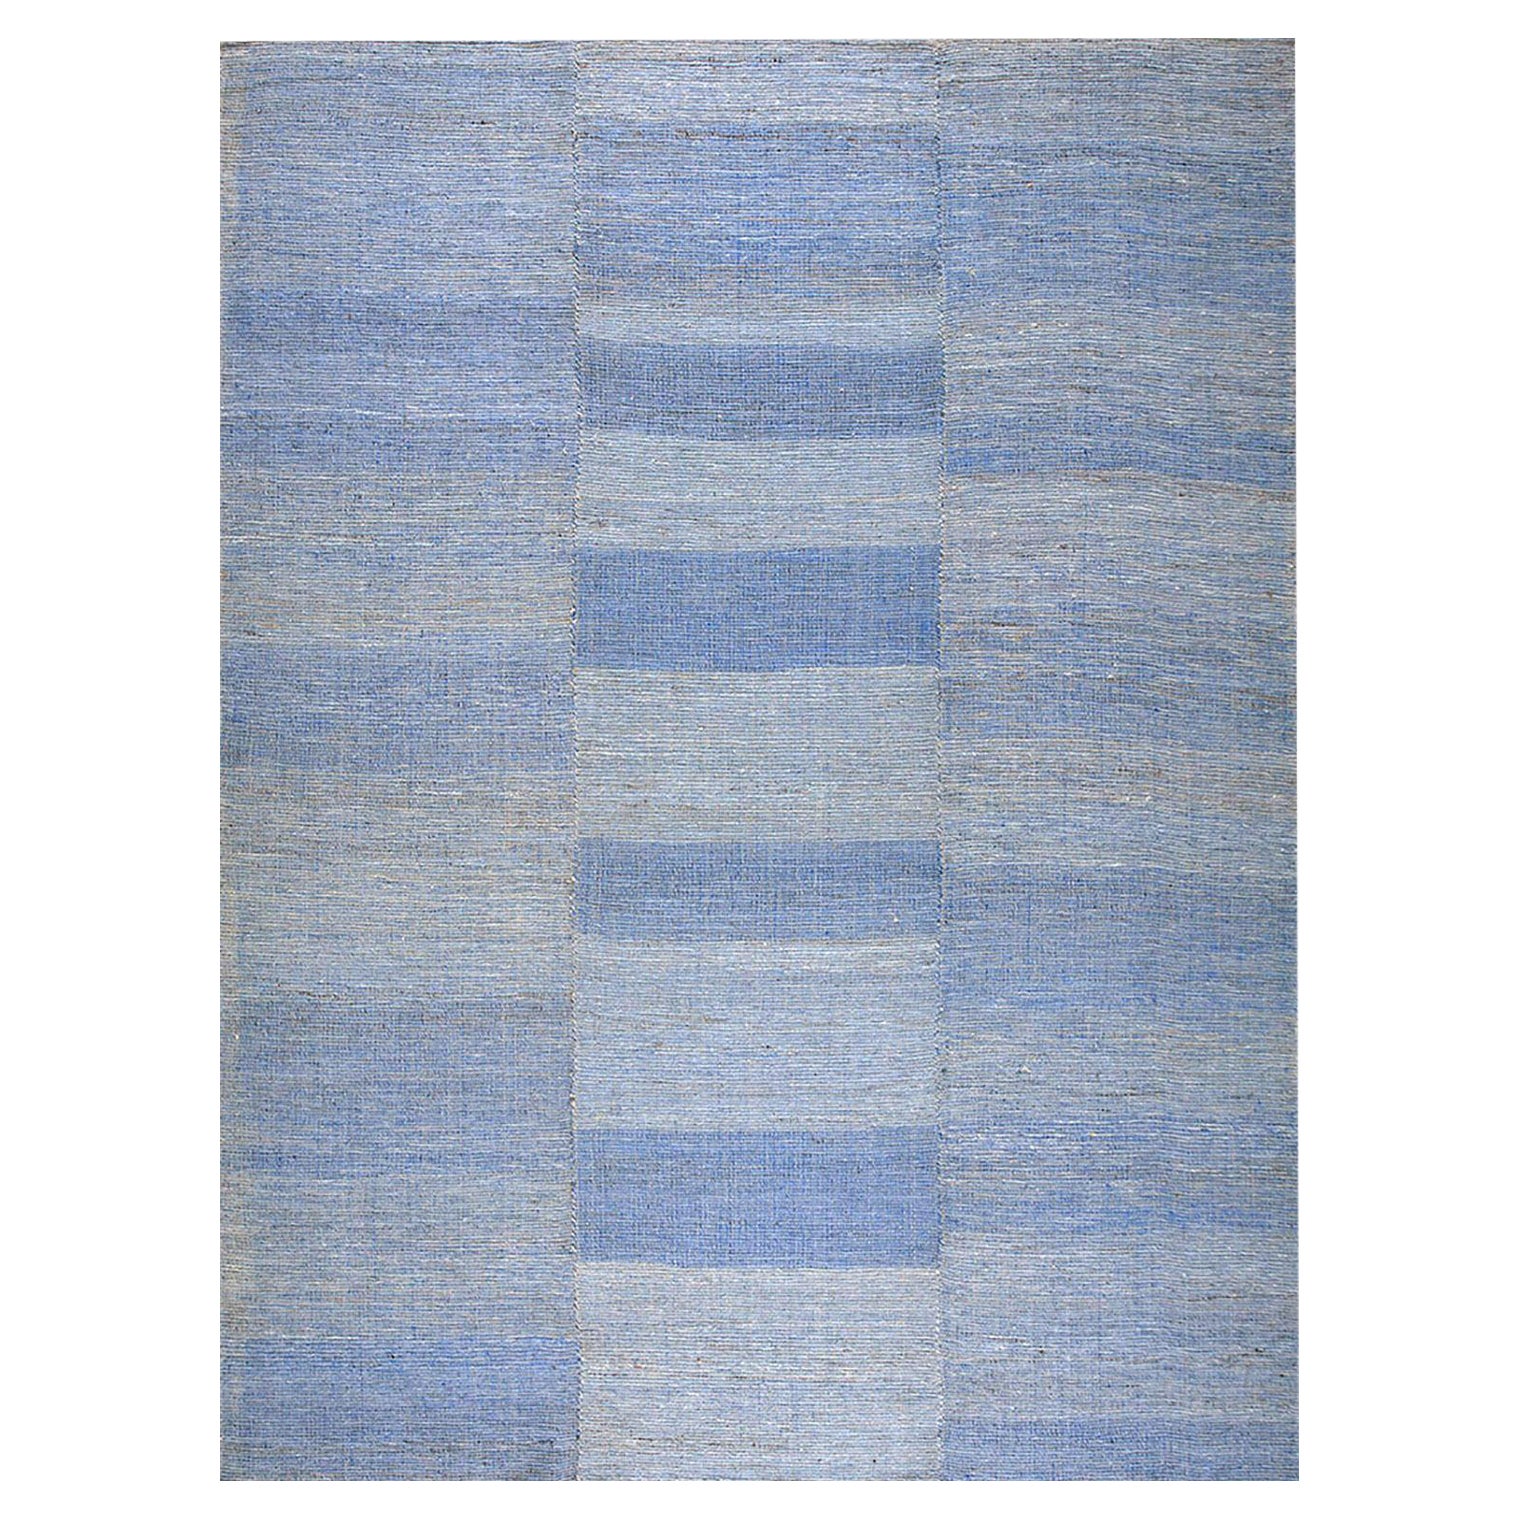 Contemporary Handwoven Wool Shaker Style Flat Weave Carpet 9' 2" X 11' 9" For Sale